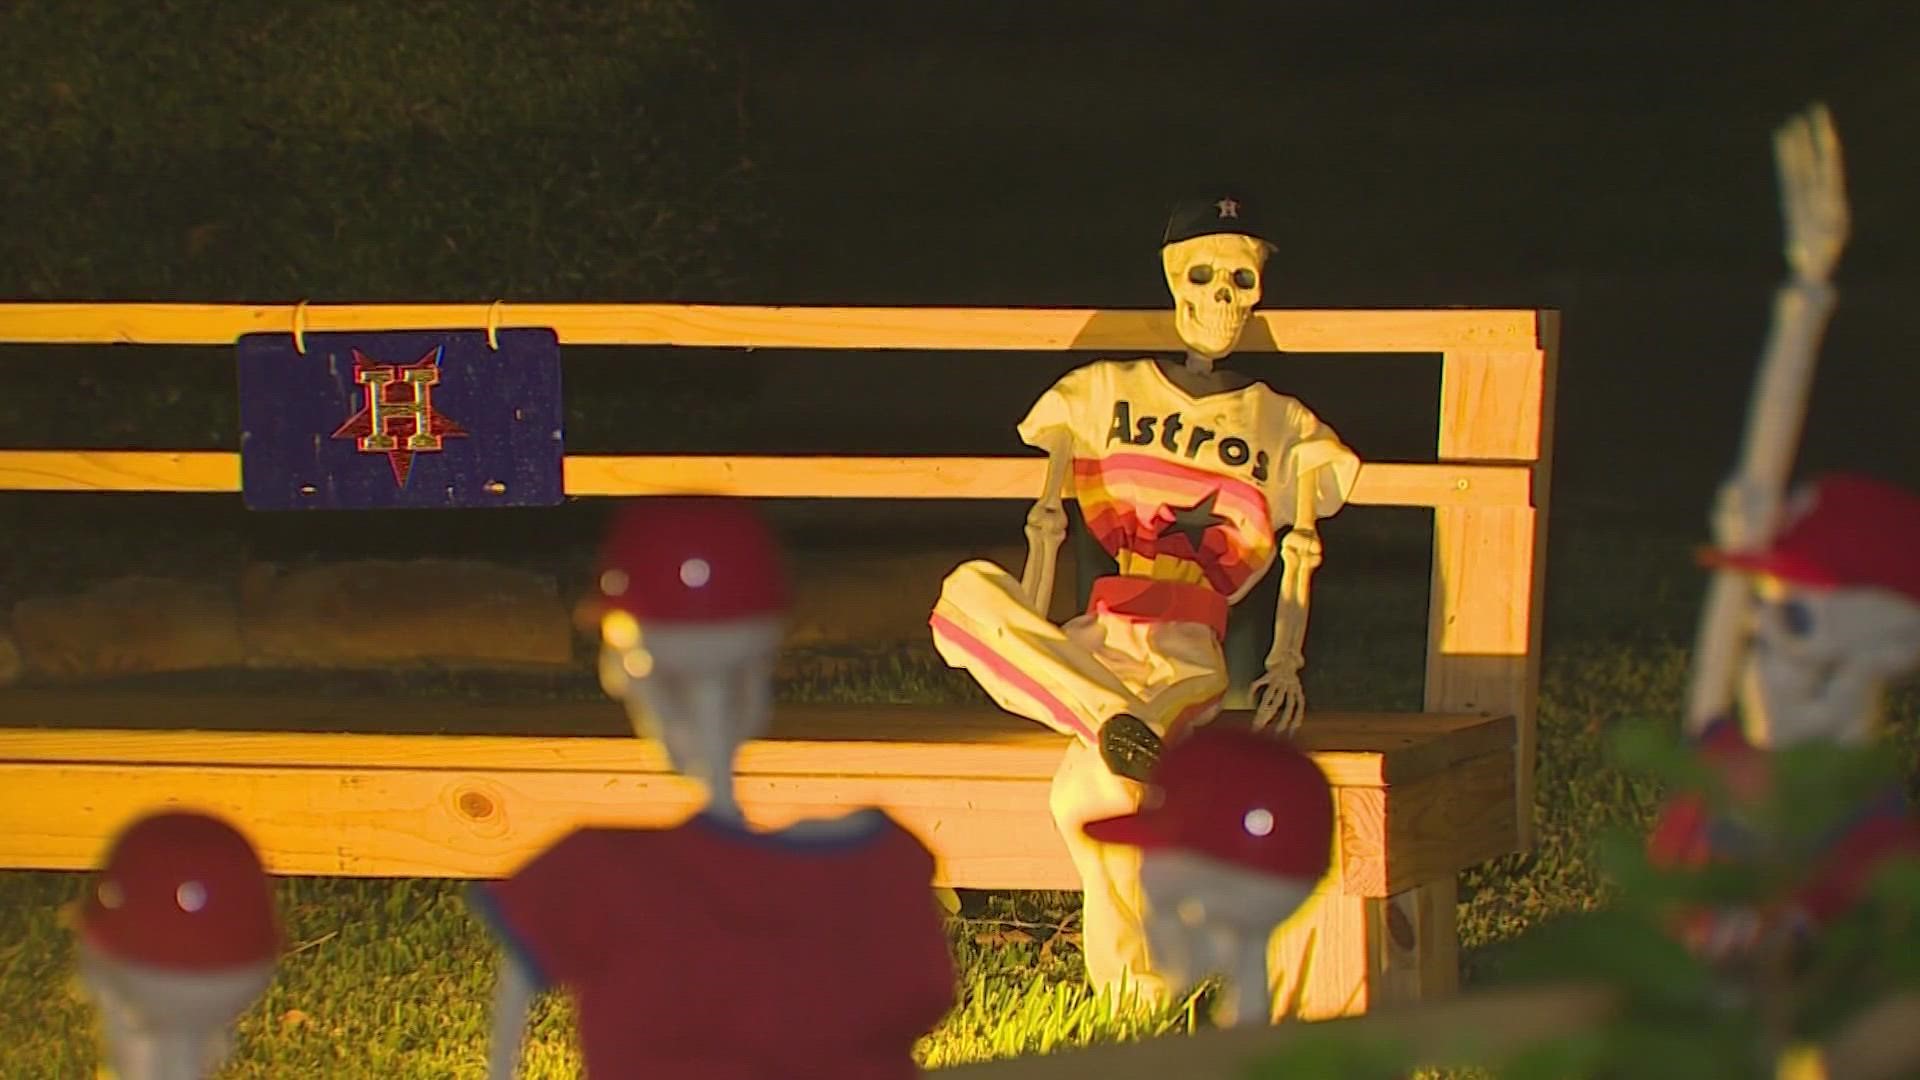 If you love the Houston Astros and Halloween, the elaborate and very "humerus" decorations in Patty Norman's yard are sure to tickle your funny bone.